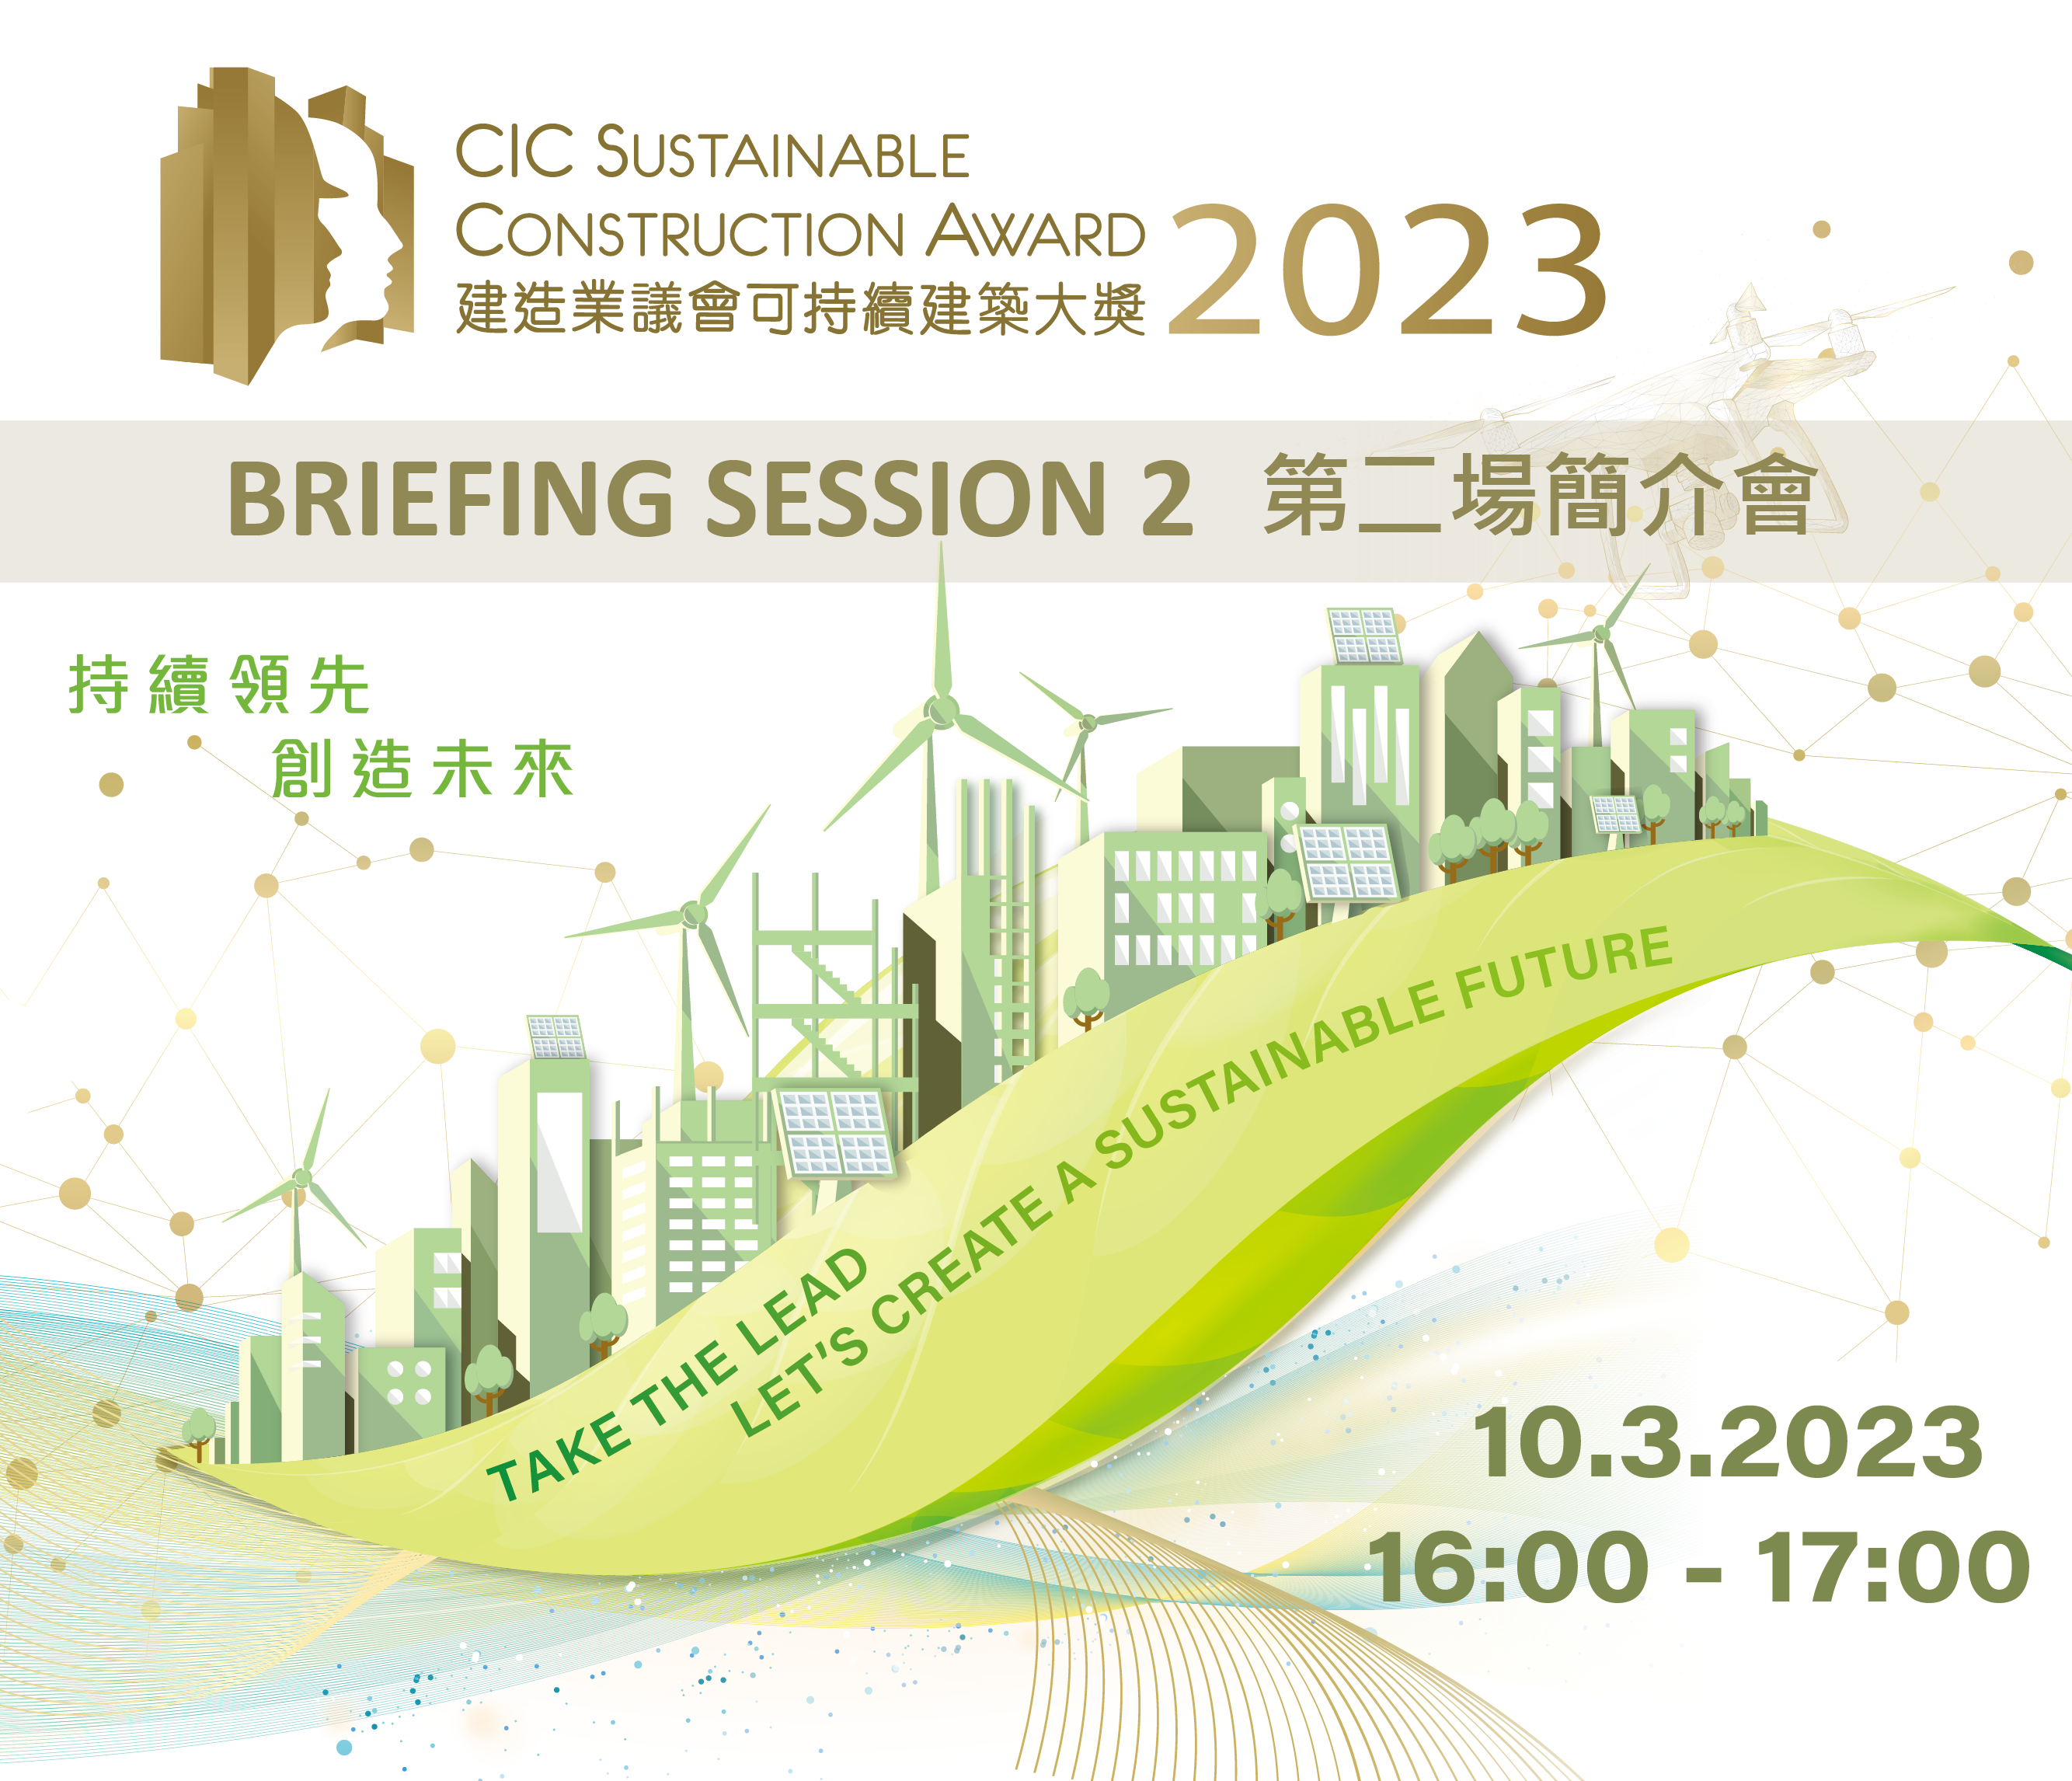 CIC Sustainable Construction Award (SCA) 2023 – 2nd Briefing Session